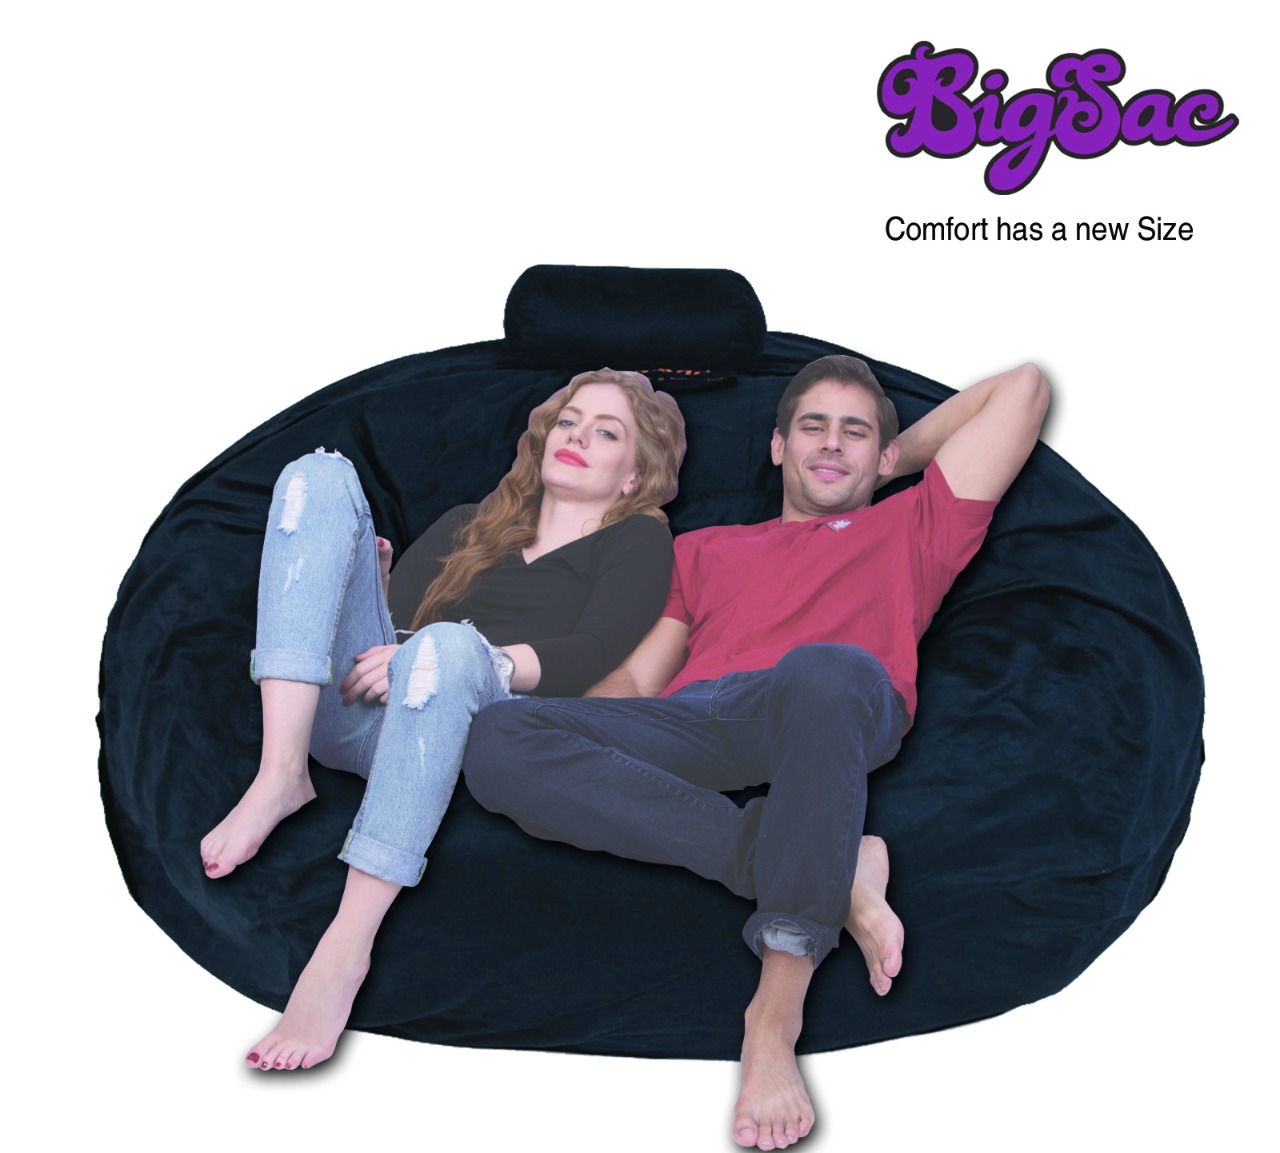 Big Sac 4.5 Feet Movie Sac Premium Suede Fabric Filled Black With Poufee  - 5 Years Warranty  